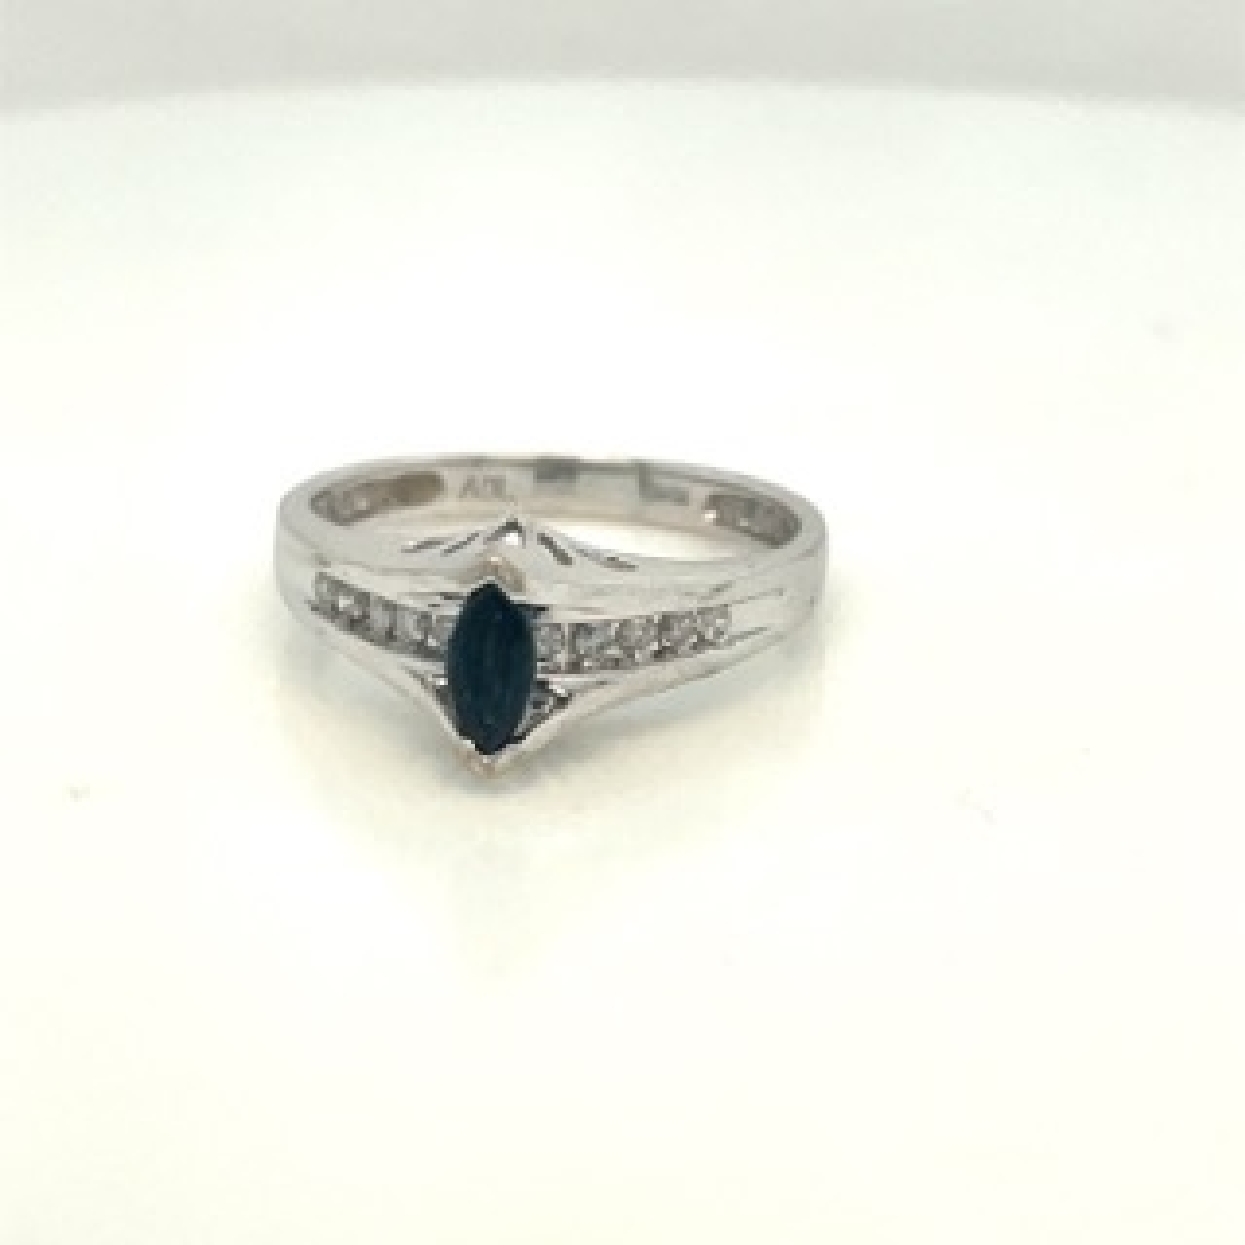 10K White Gold Ring with a Marquise Sapphire Center and Channel Set Diamond Accent
Size:7